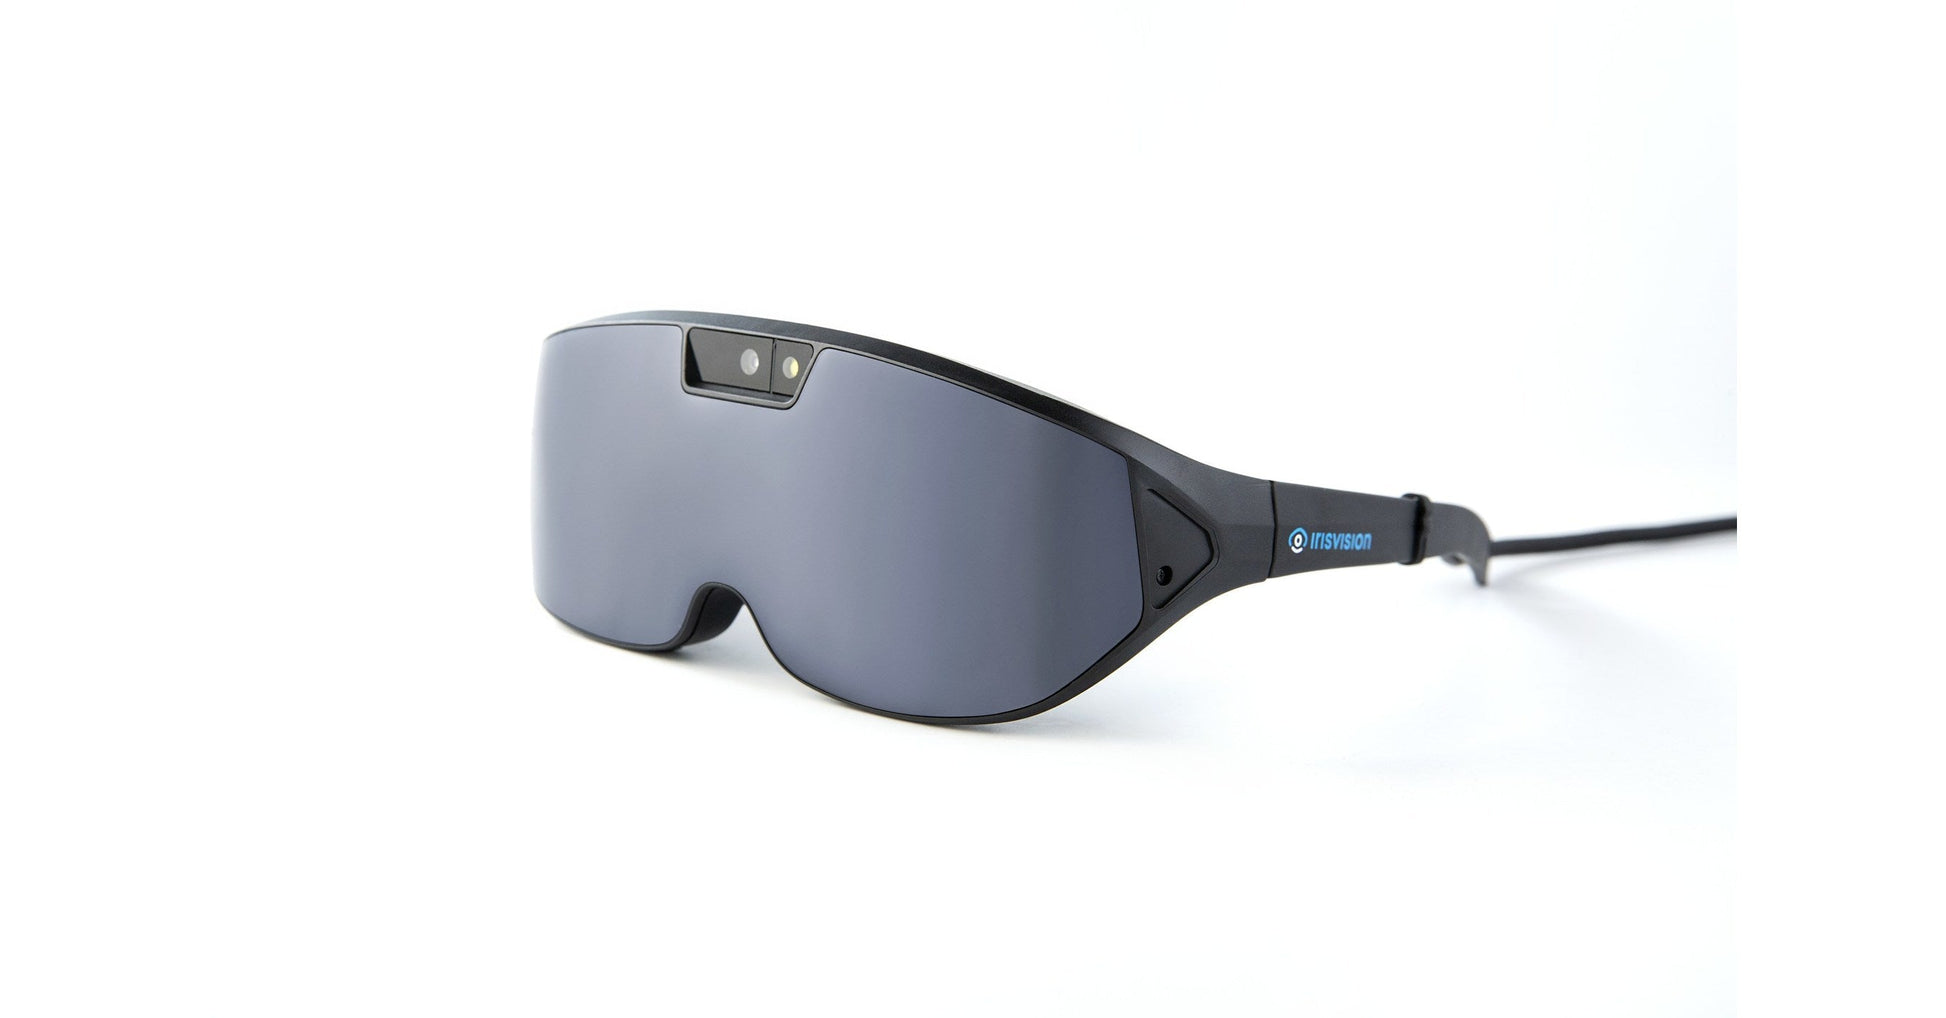 IrisVision Inspire's wearable technology is a low-profile wearable software platform delivering functional sight for low vision. This lightweight, all-in-one, multi-distance, and autofocus solution is designed to be intuitively easy-to-use. 